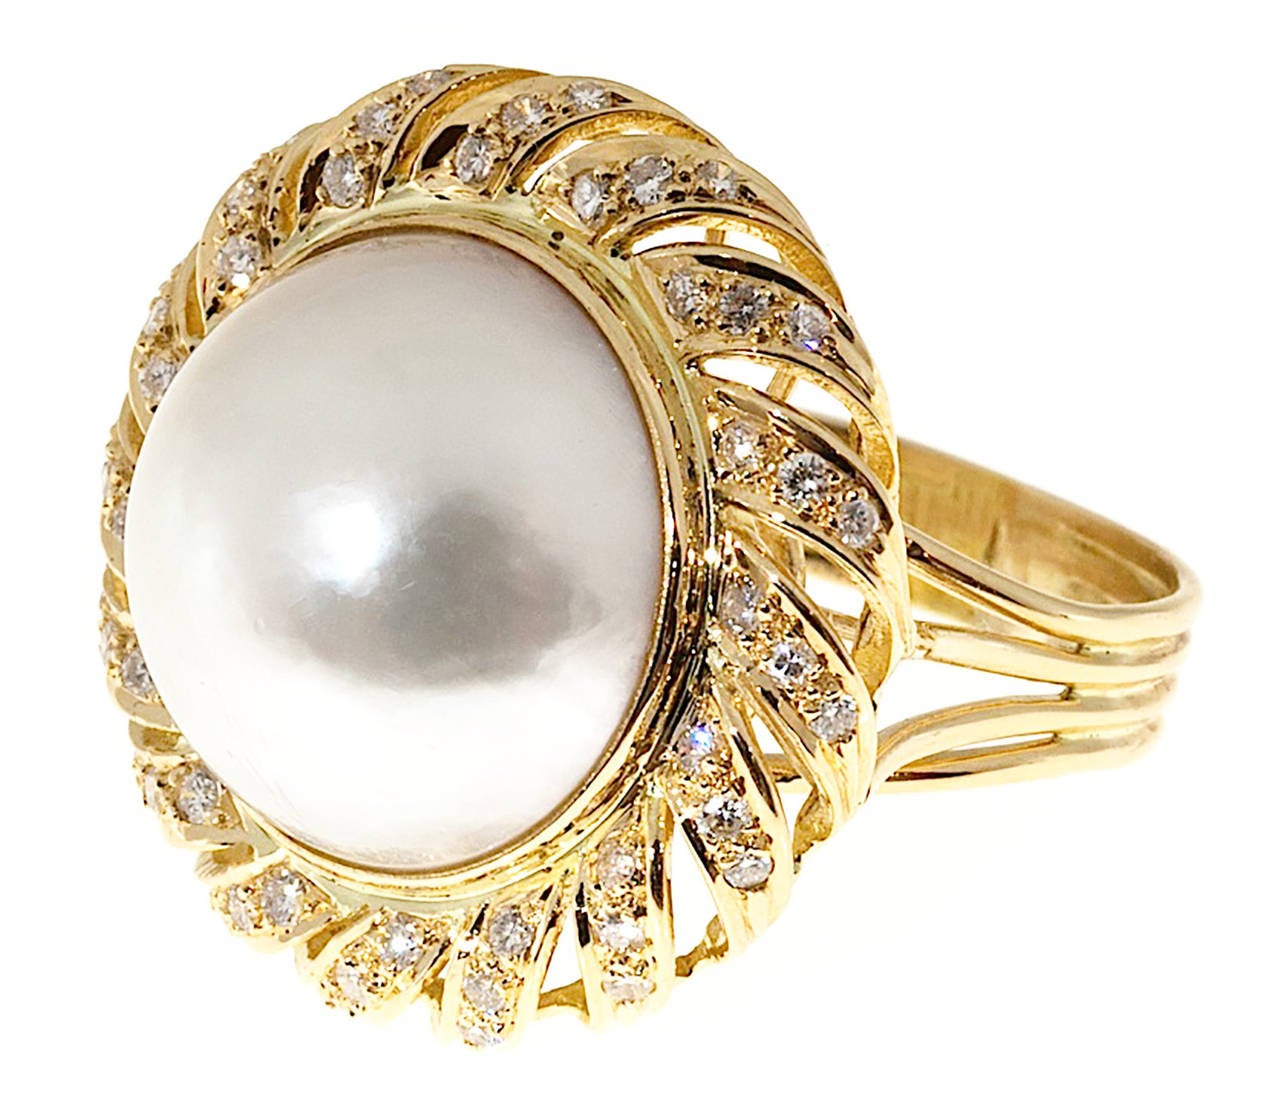 Pearl and Diamond Gold Swirl Ring For Sale at 1stdibs